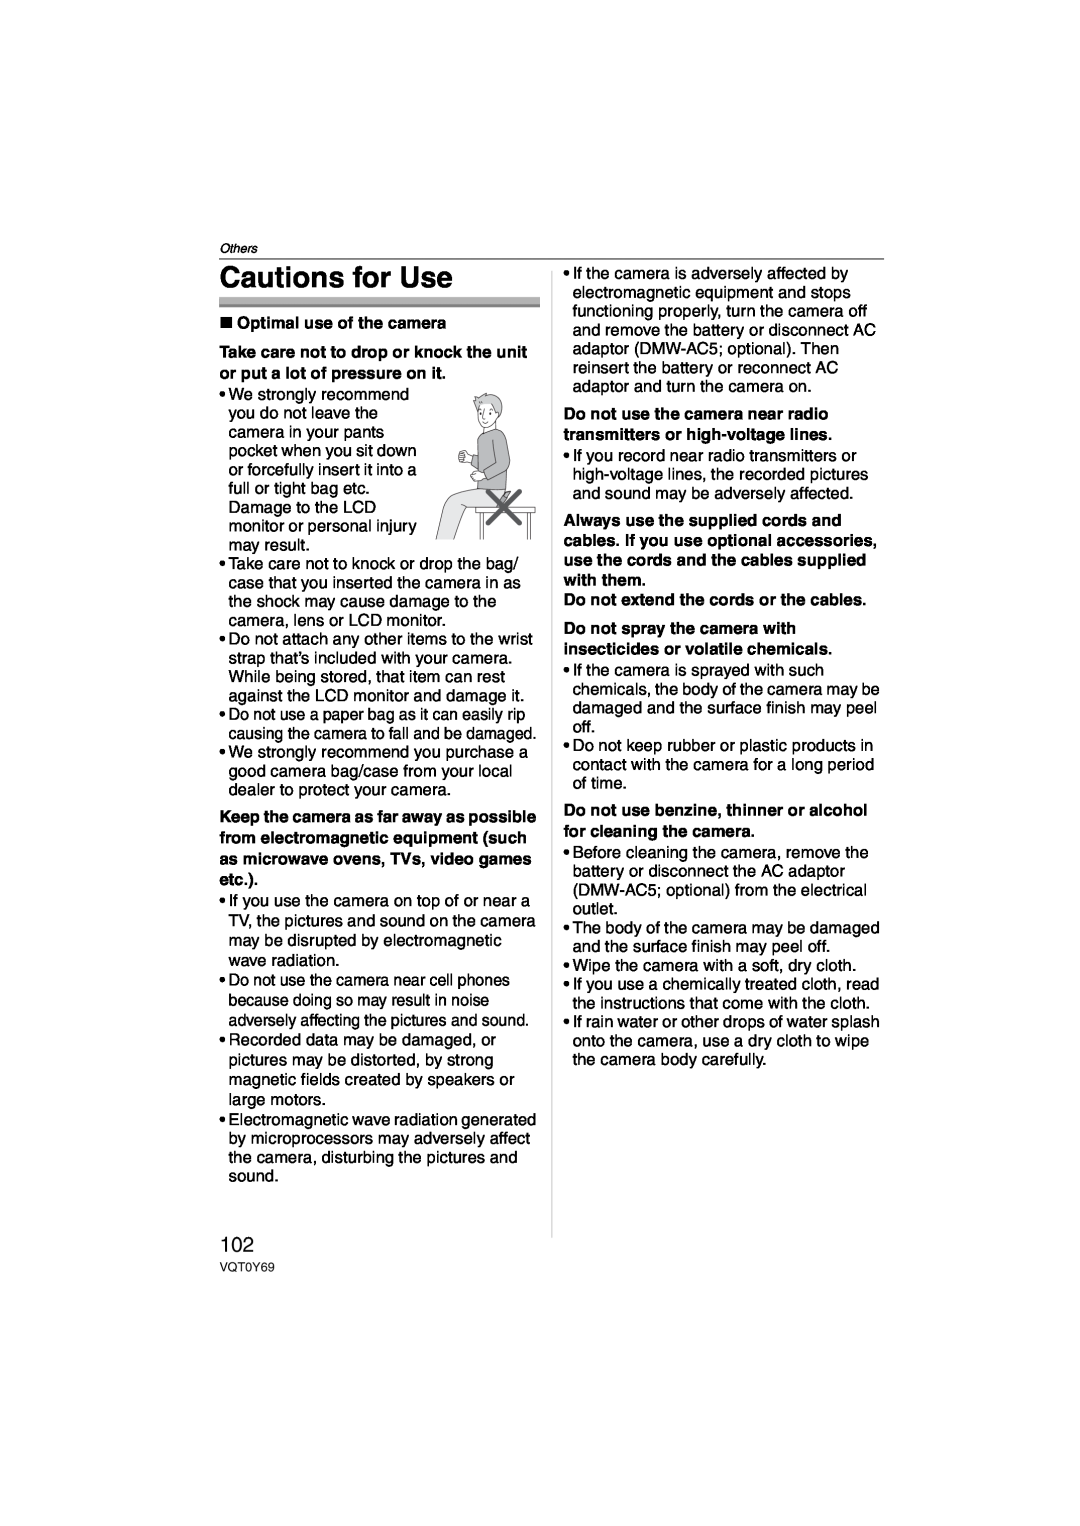 Panasonic DMC-FX07, DMC-FX3 Cautions for Use, ∫ Optimal use of the camera, Do not extend the cords or the cables 